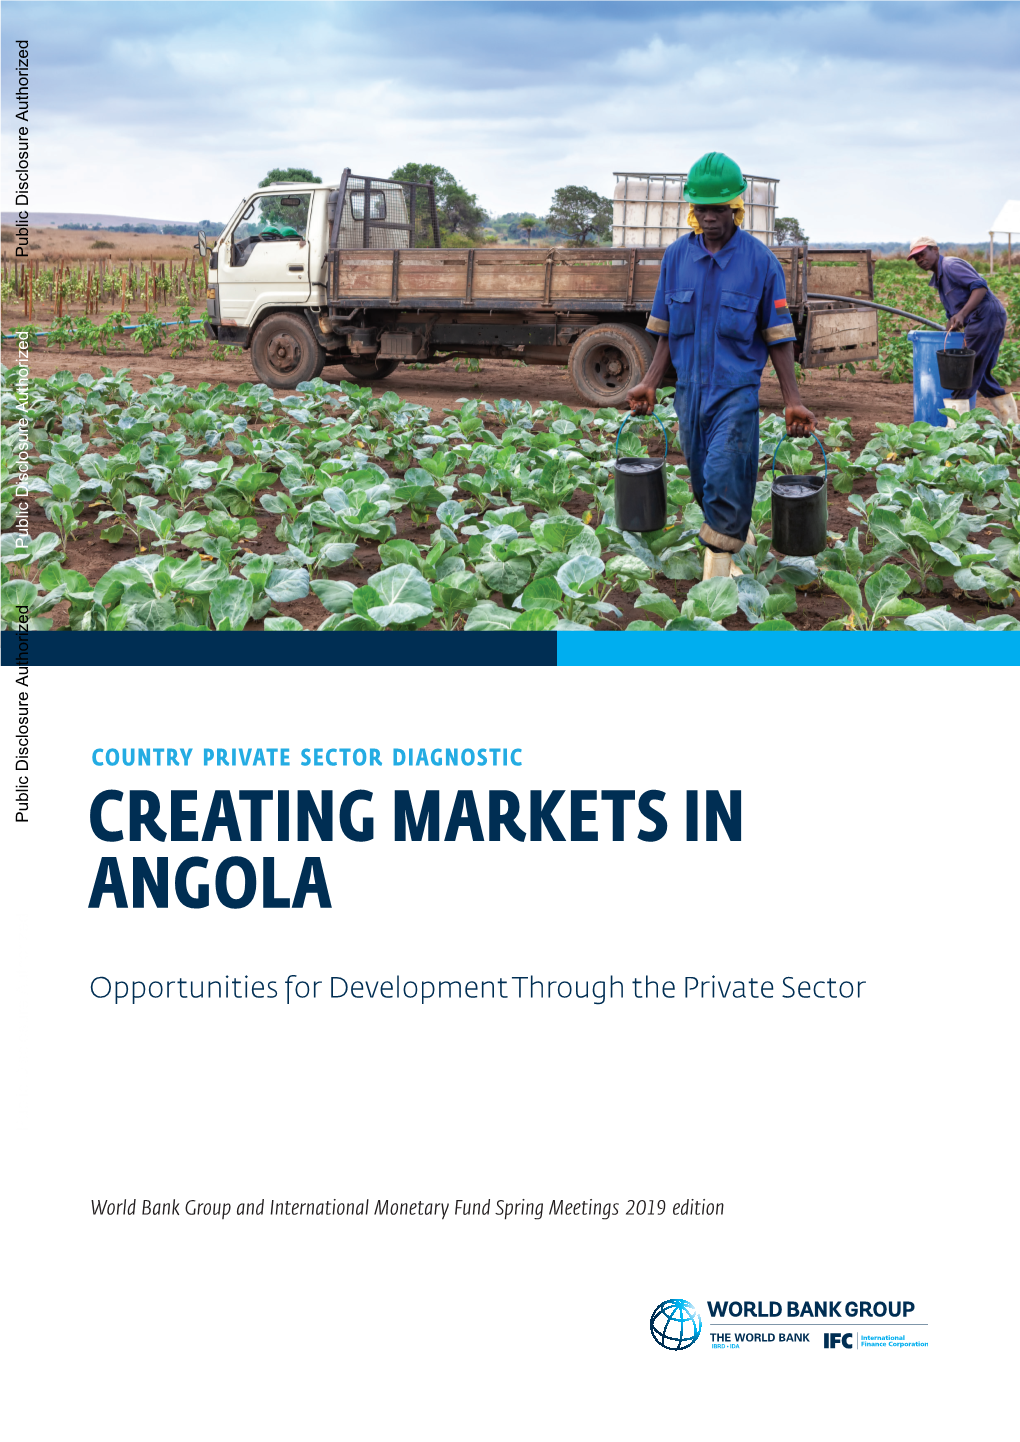 Creating Markets in Angola Country Private Sector Diagnostic Country Private Sector Diagnostic Creating Markets in Angola